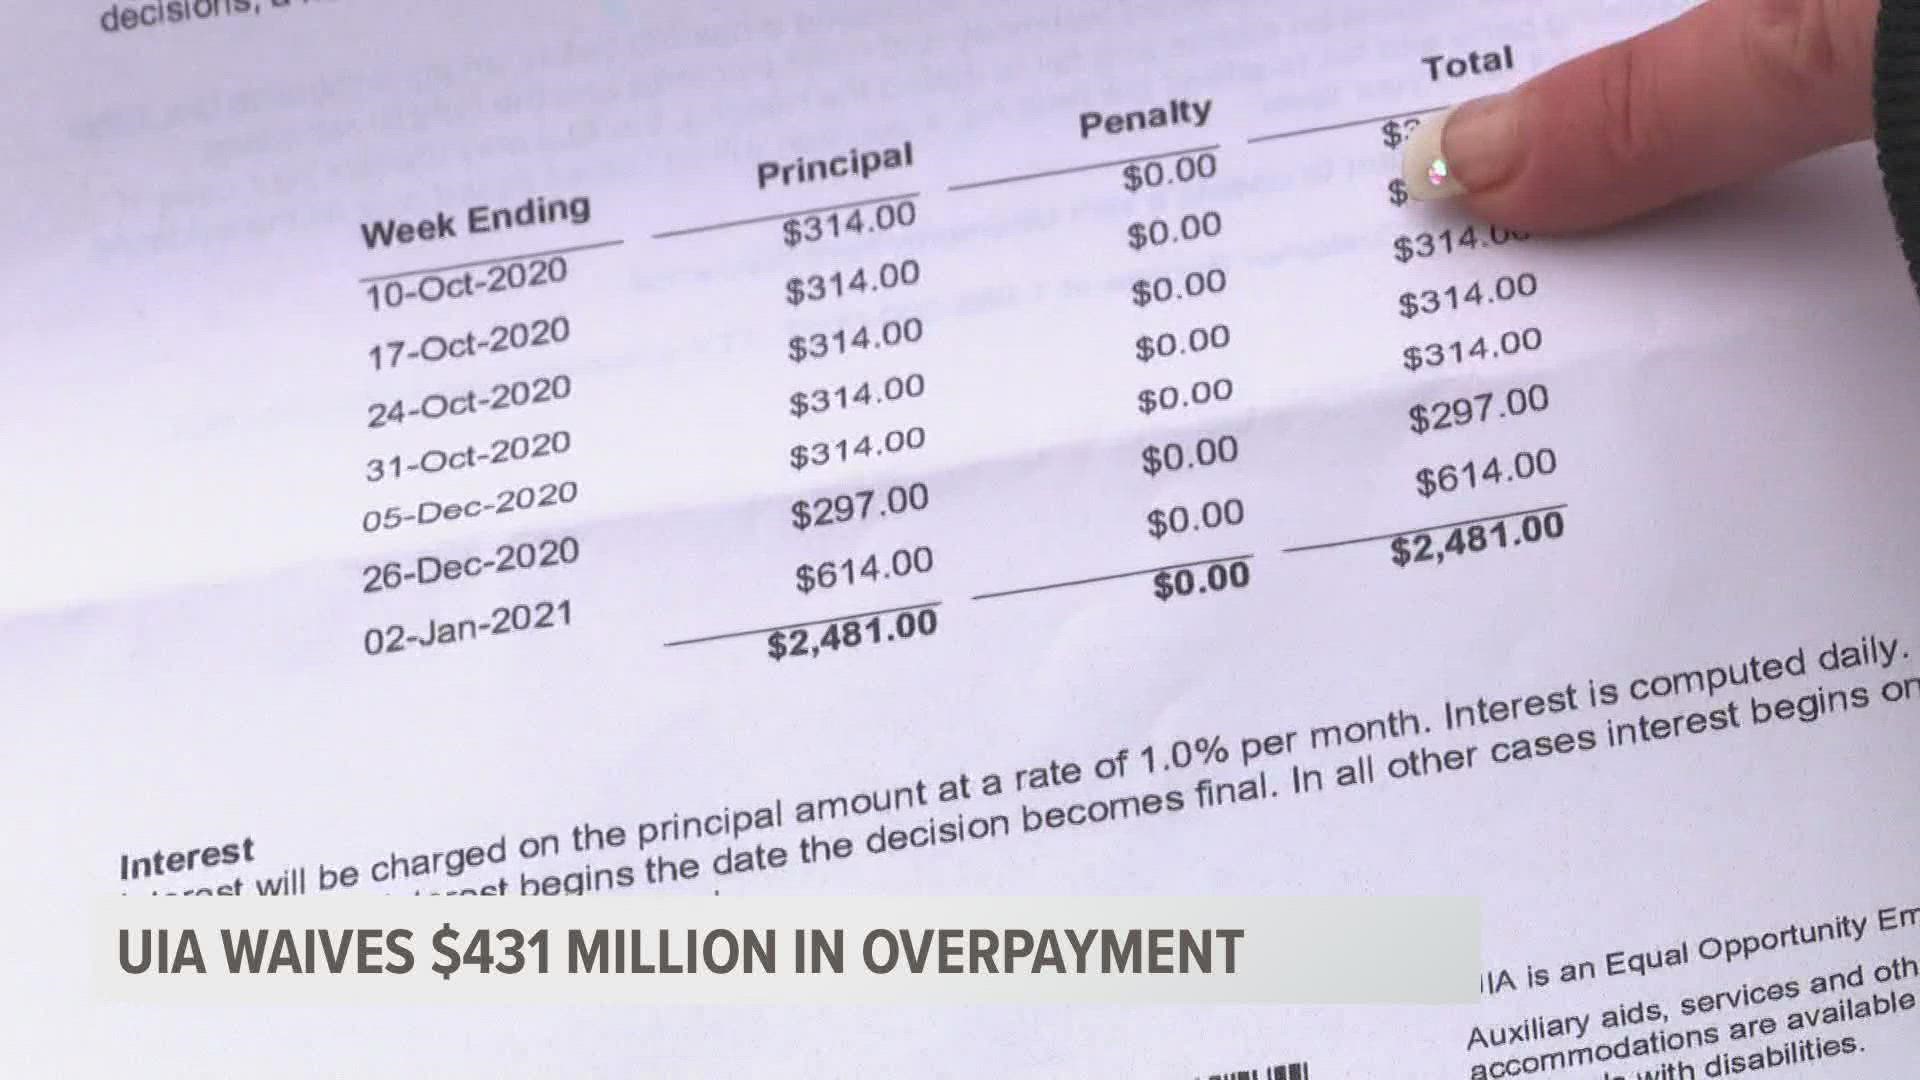 To date the UIA has waived over $4.3 billion in overpayment debt for more than 400,000 Michiganders.